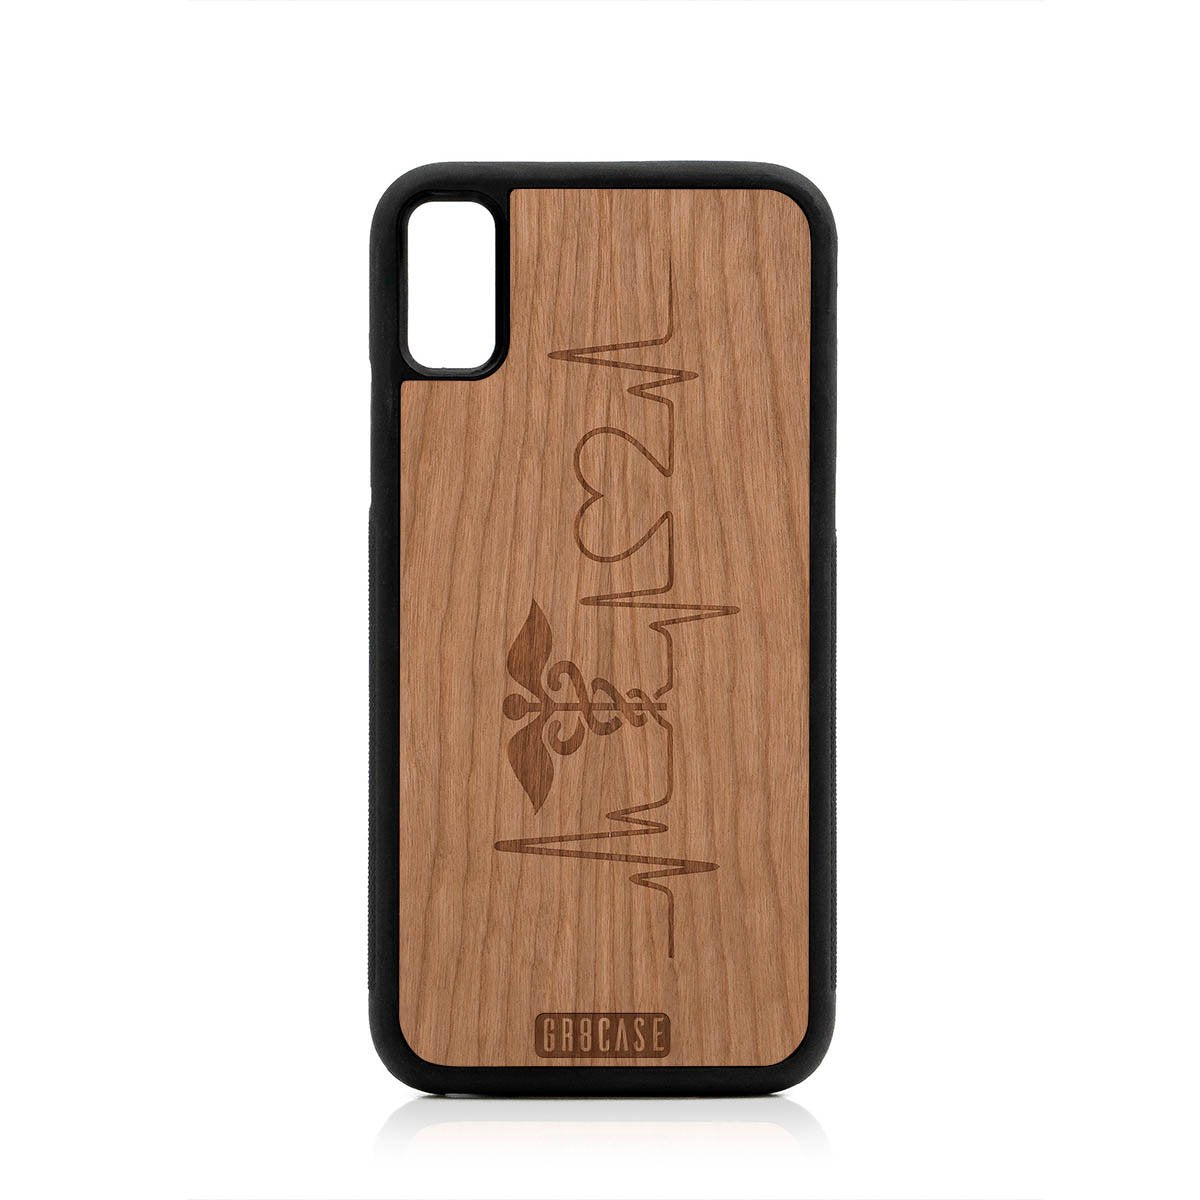 Hero's Heart (Nurse, Doctor) Design Wood Case For iPhone X/XS by GR8CASE